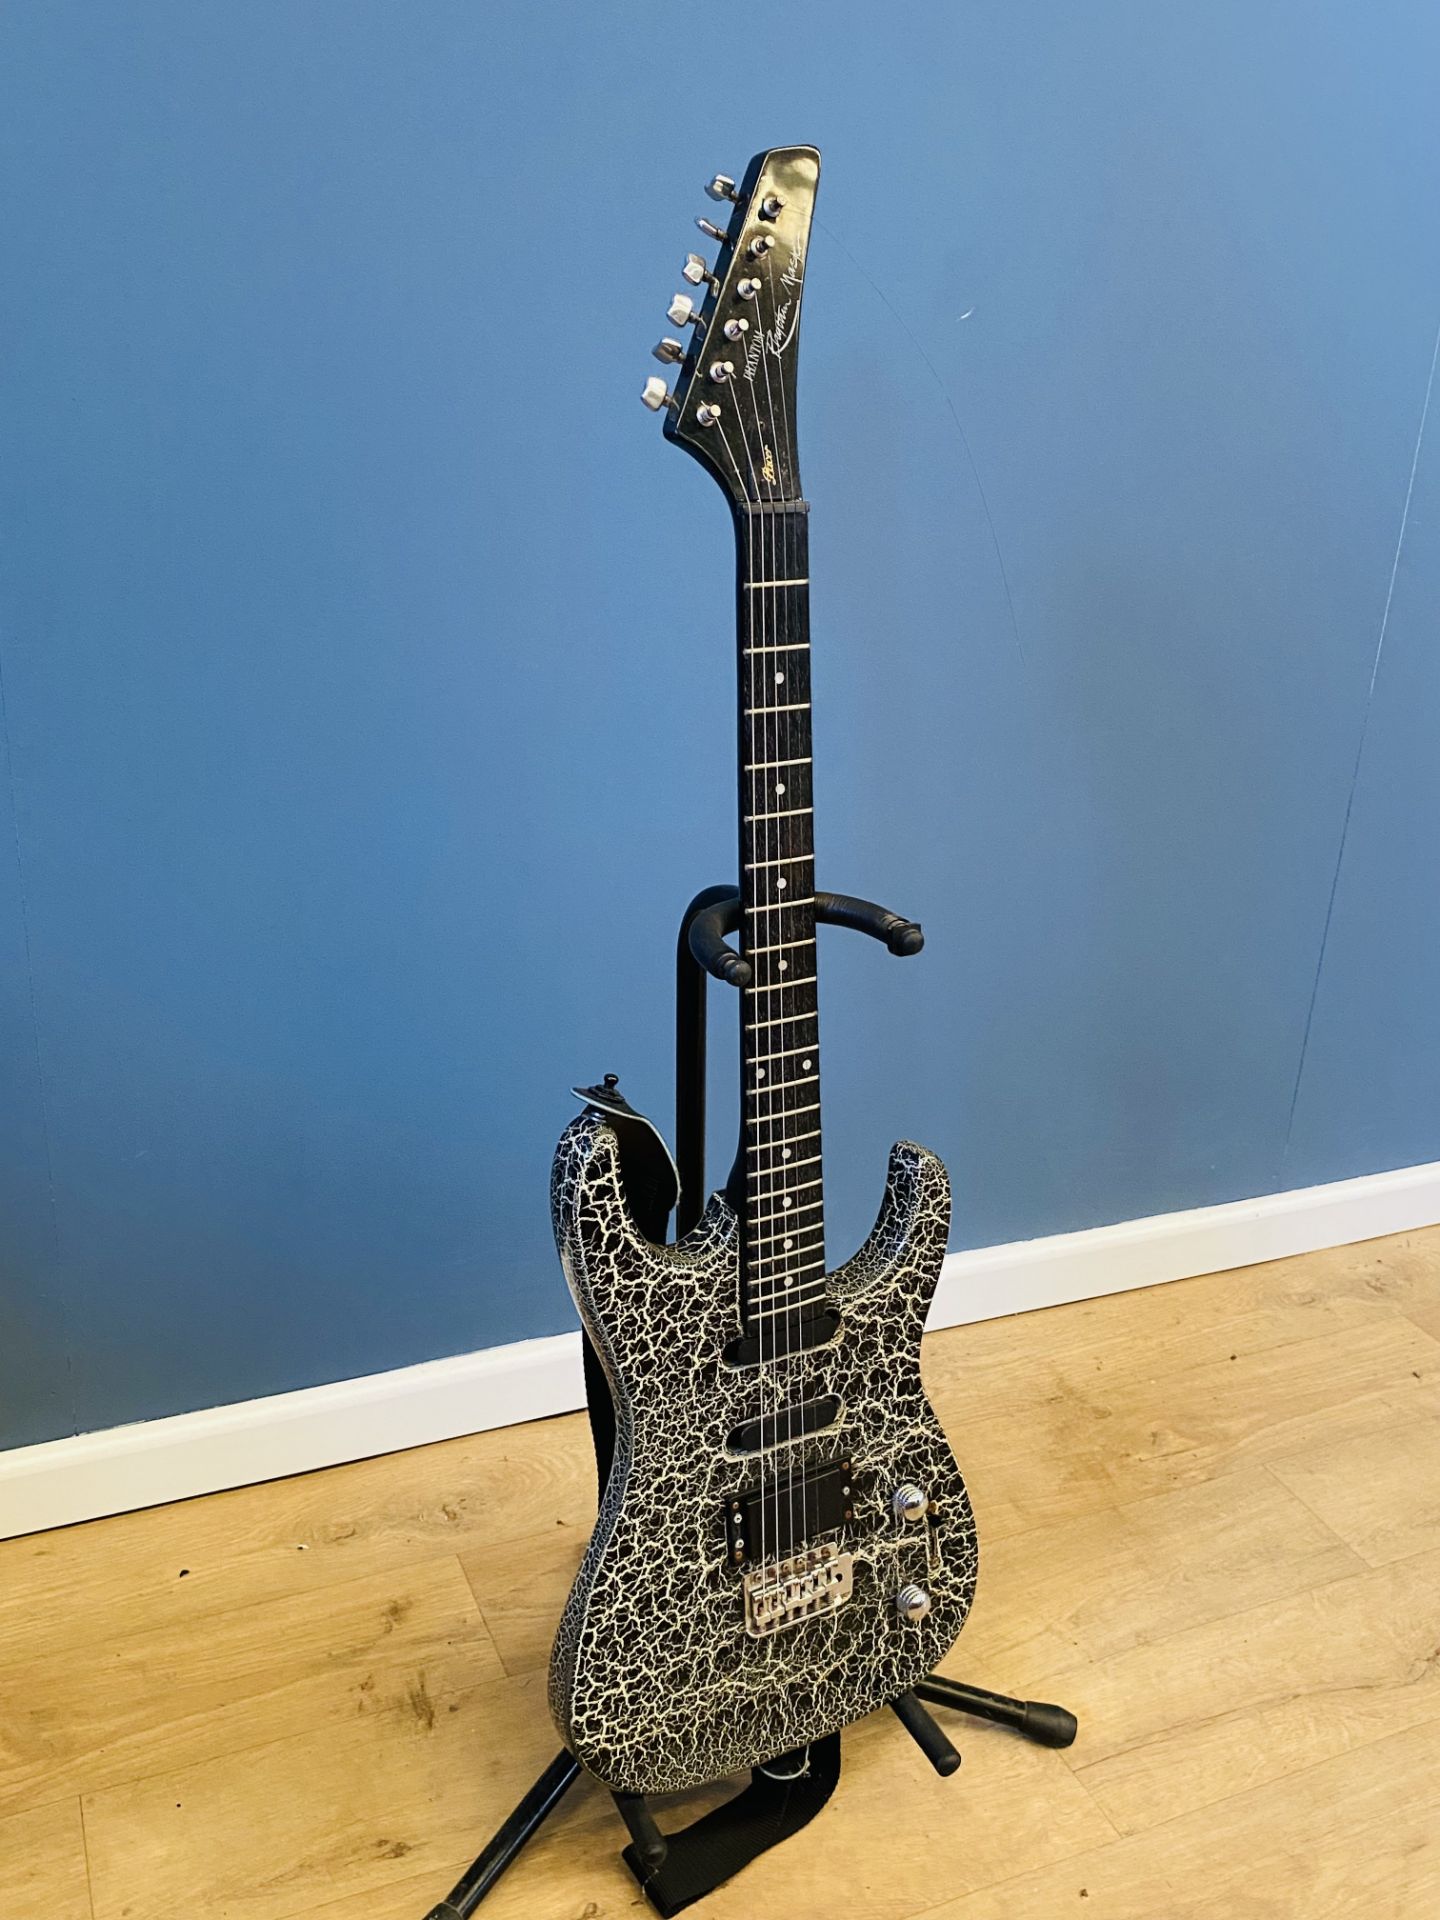 Pacer Phantom Rhythm Master electric guitar with crackle finish. - Image 2 of 4